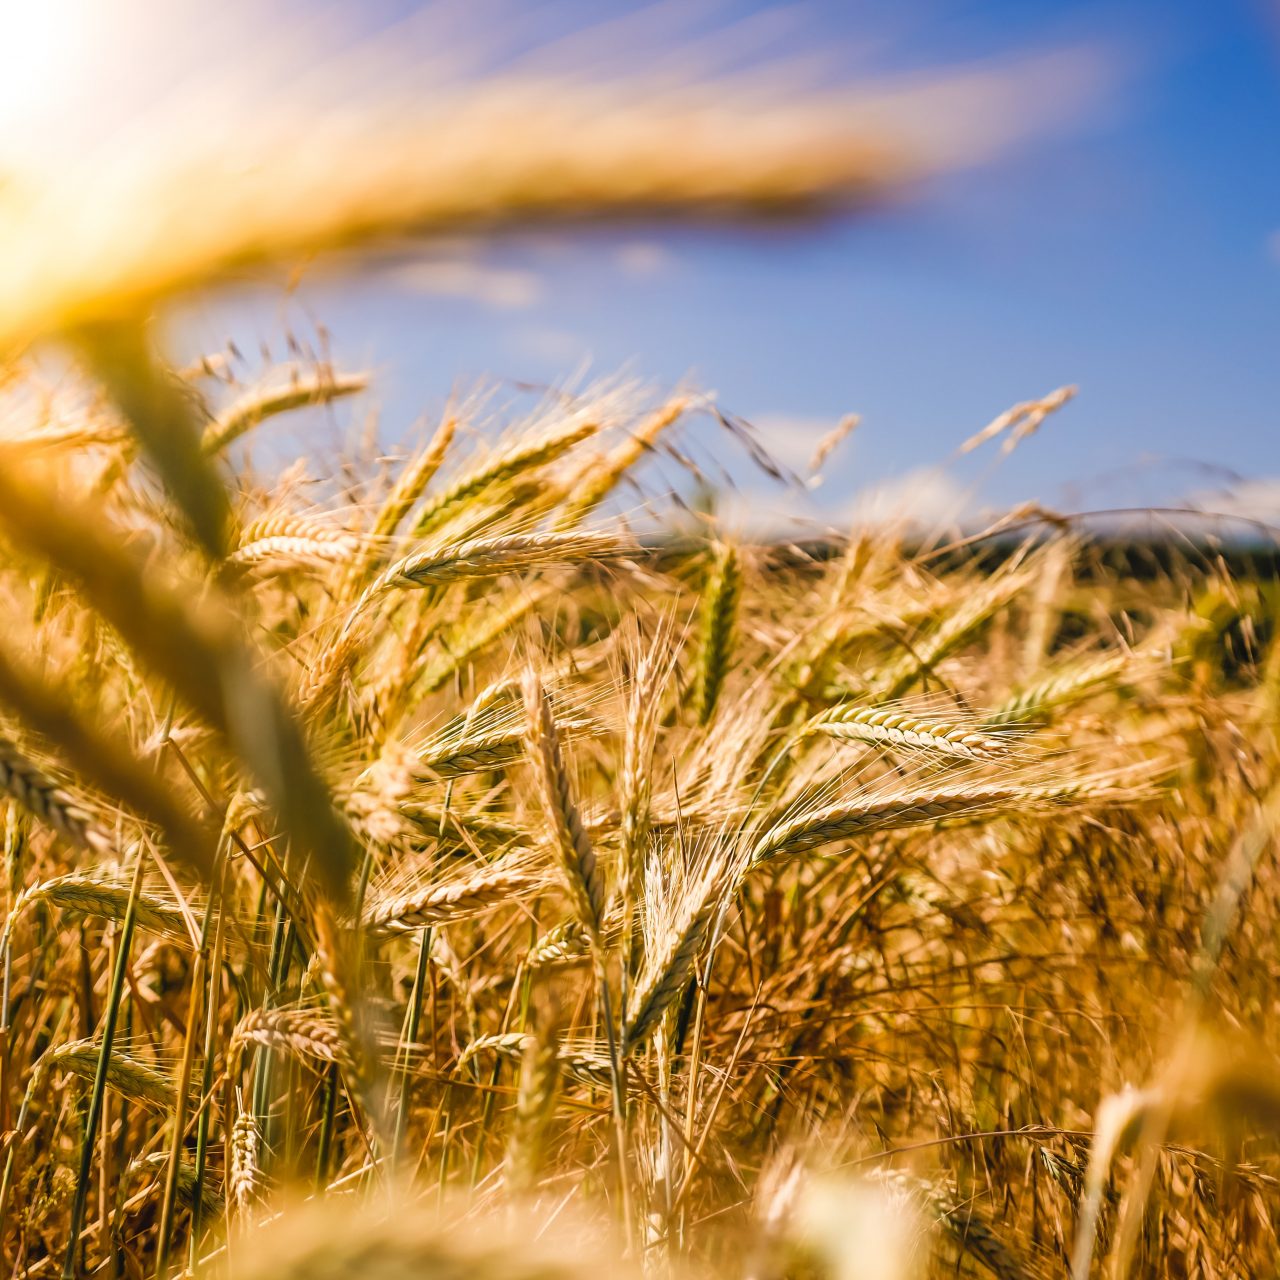 Egypt intends to acquire 4 million tonnes of wheat to secure its imports